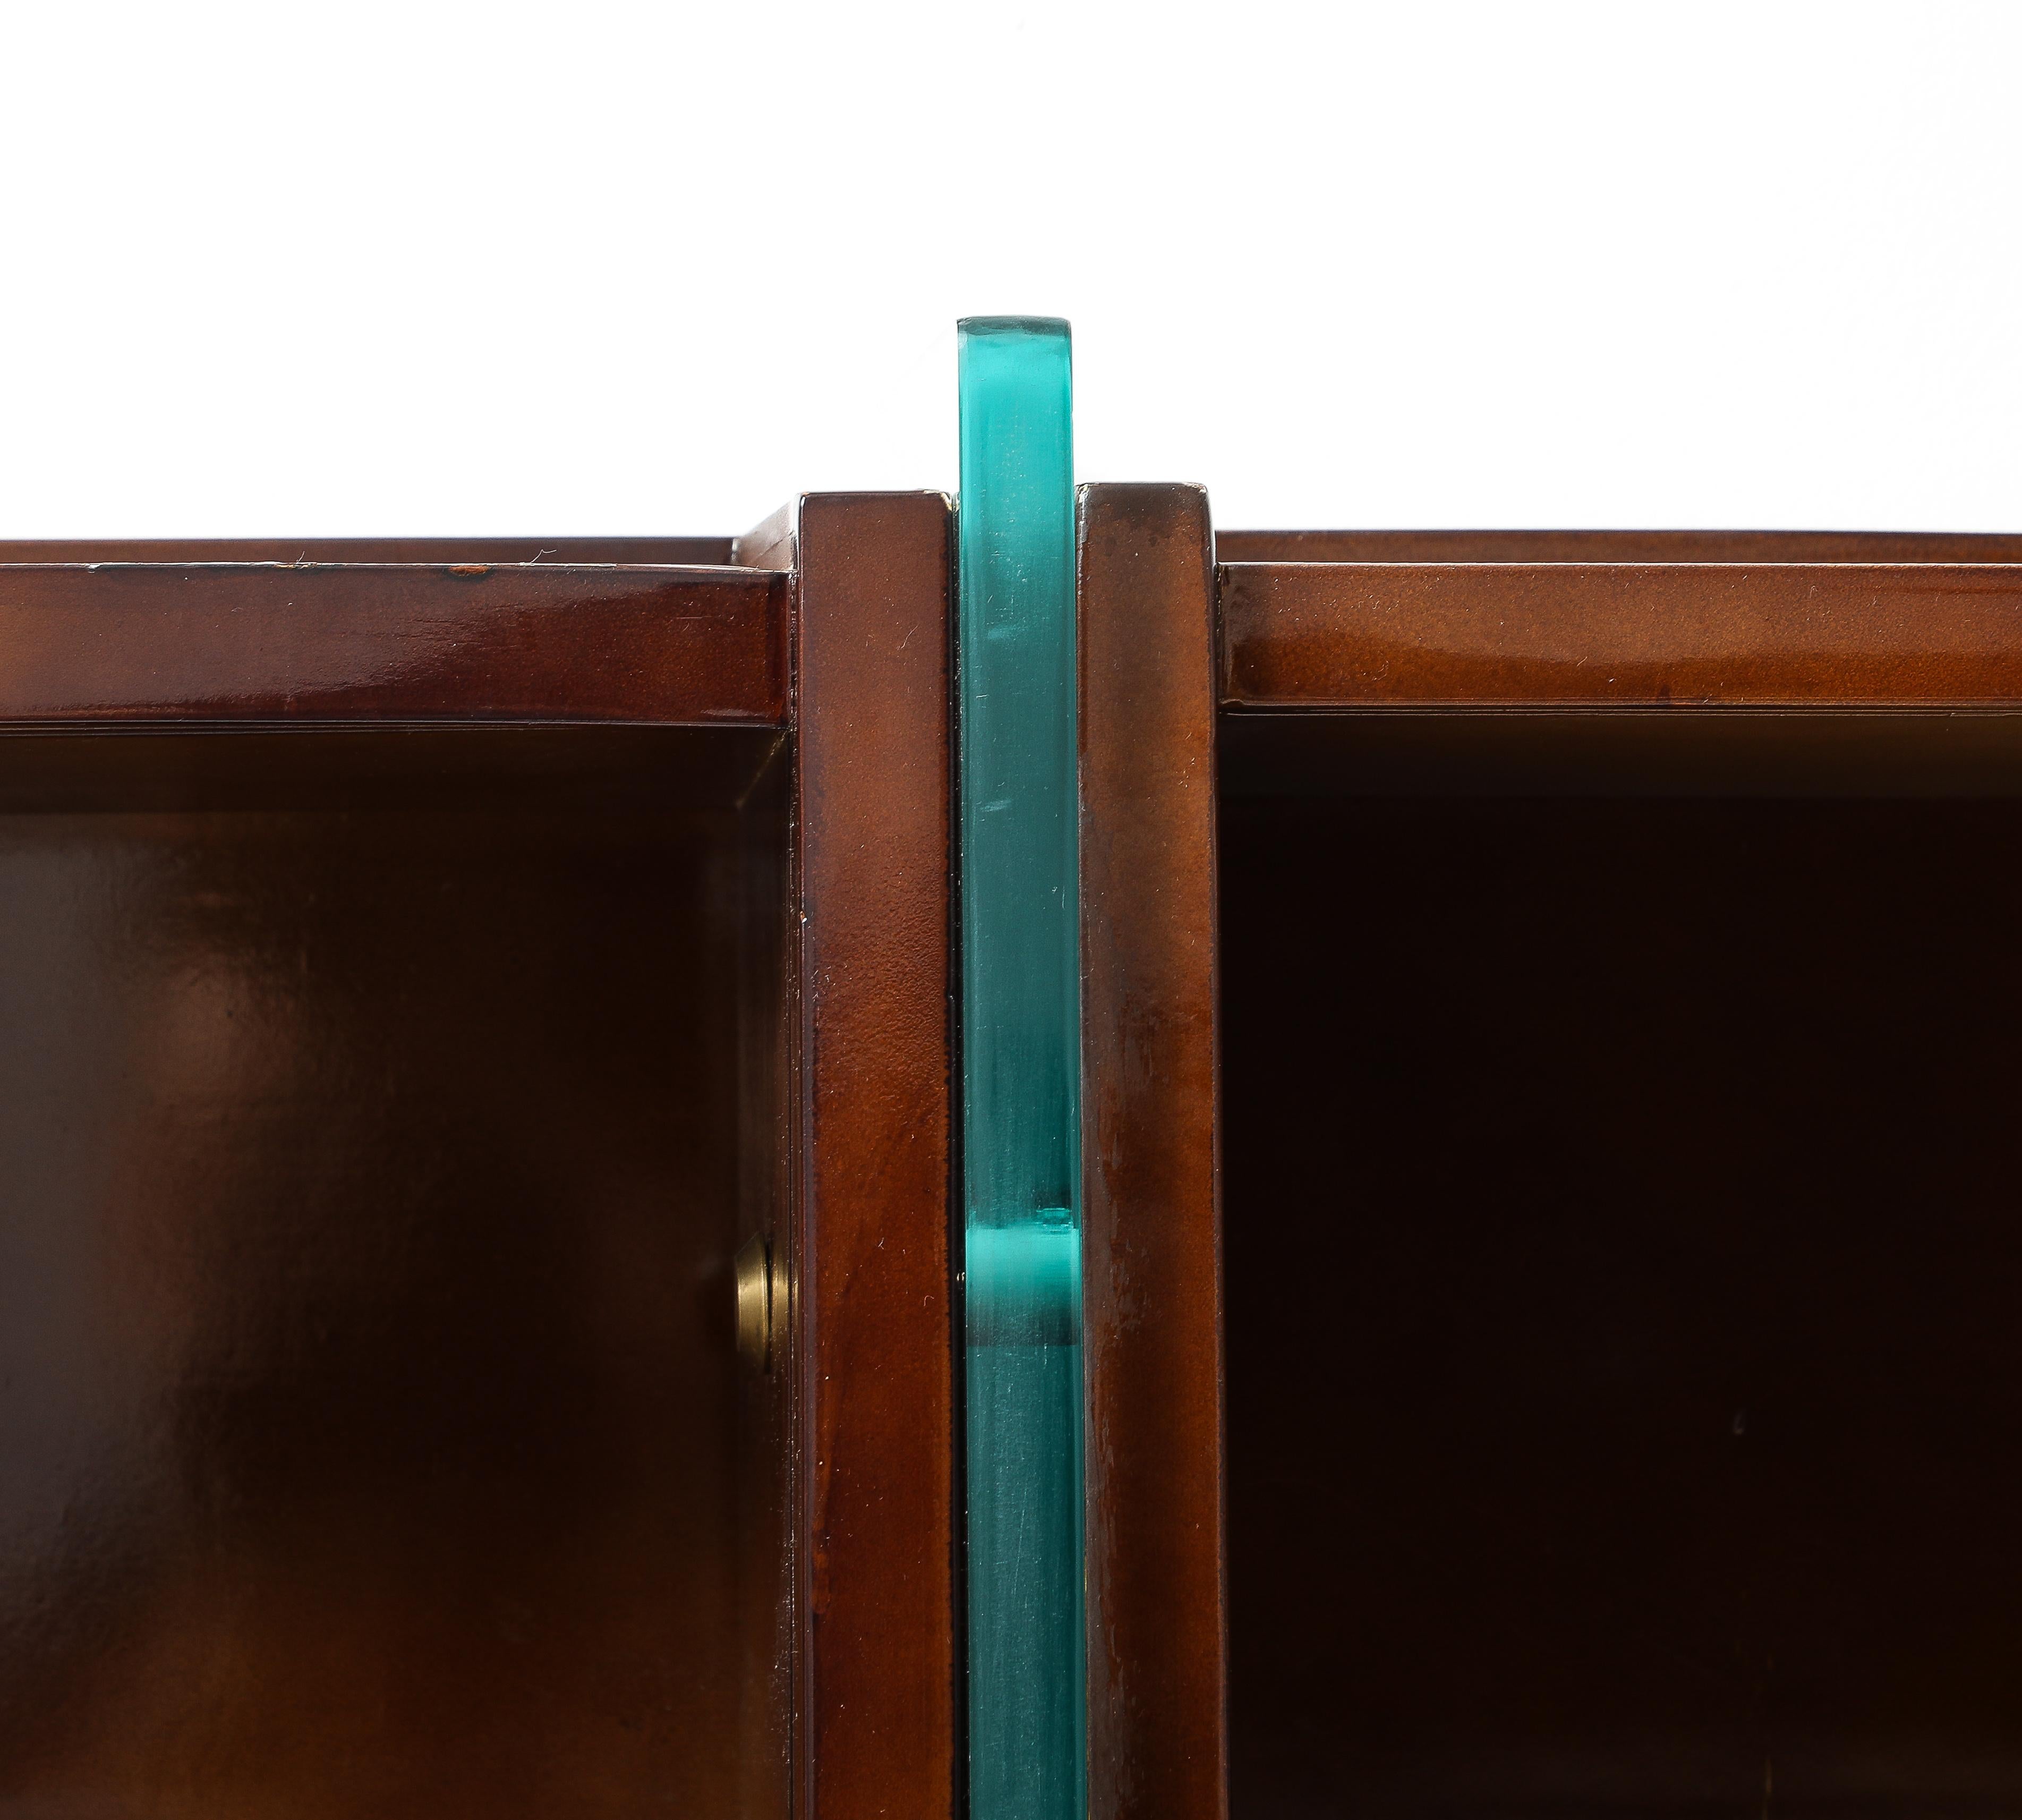 Raphael Raphel Bookcase in Lacquered Wood & Glass, France 1950's For Sale 6